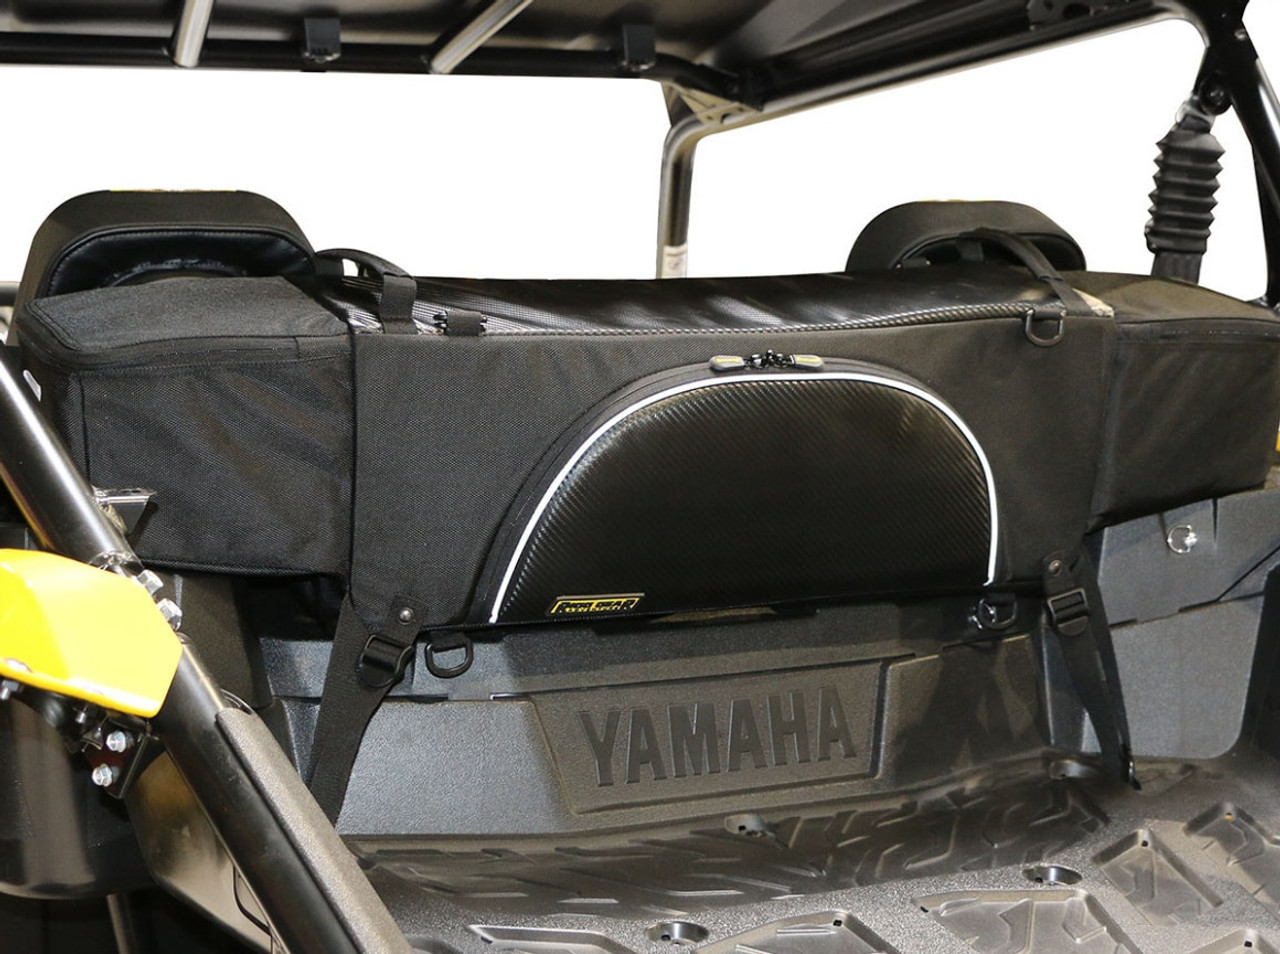 Finding full coverage protection with Rigg Gear Defender Extreme Pro UTV  Covers - UTV Sports